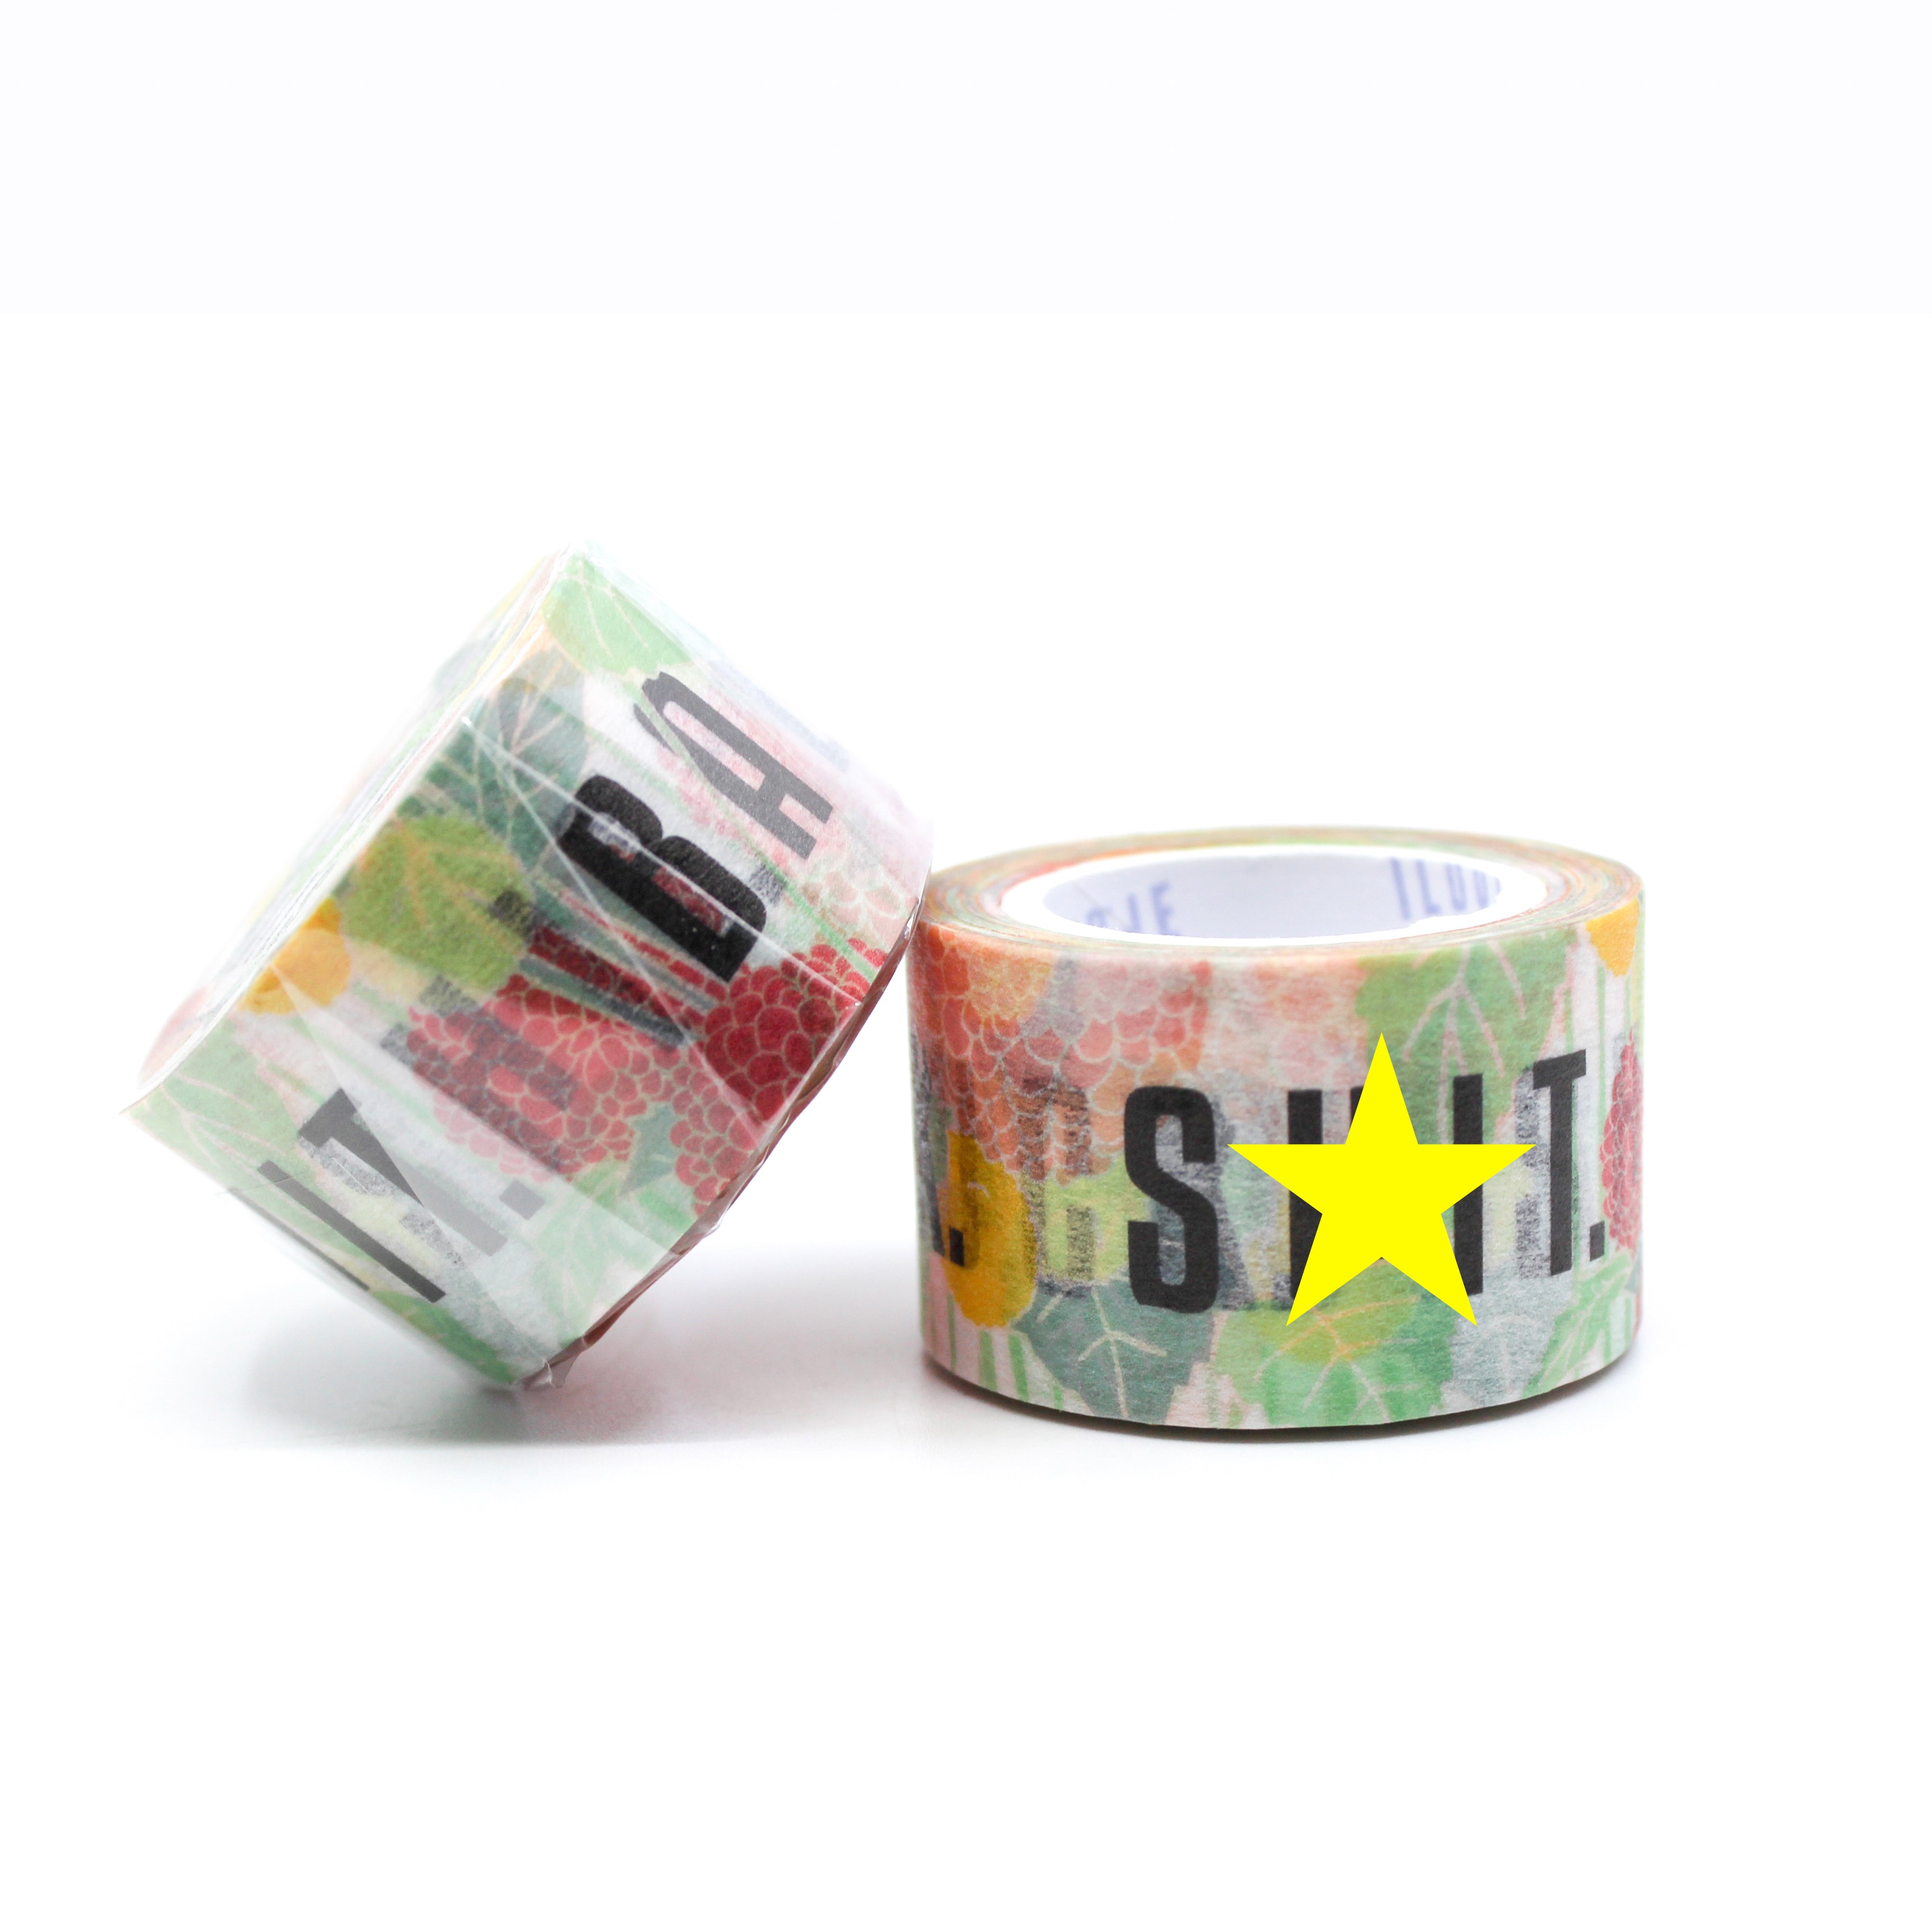 This is a photo of two Potty Mouth Washi tapes from BBB Supplies